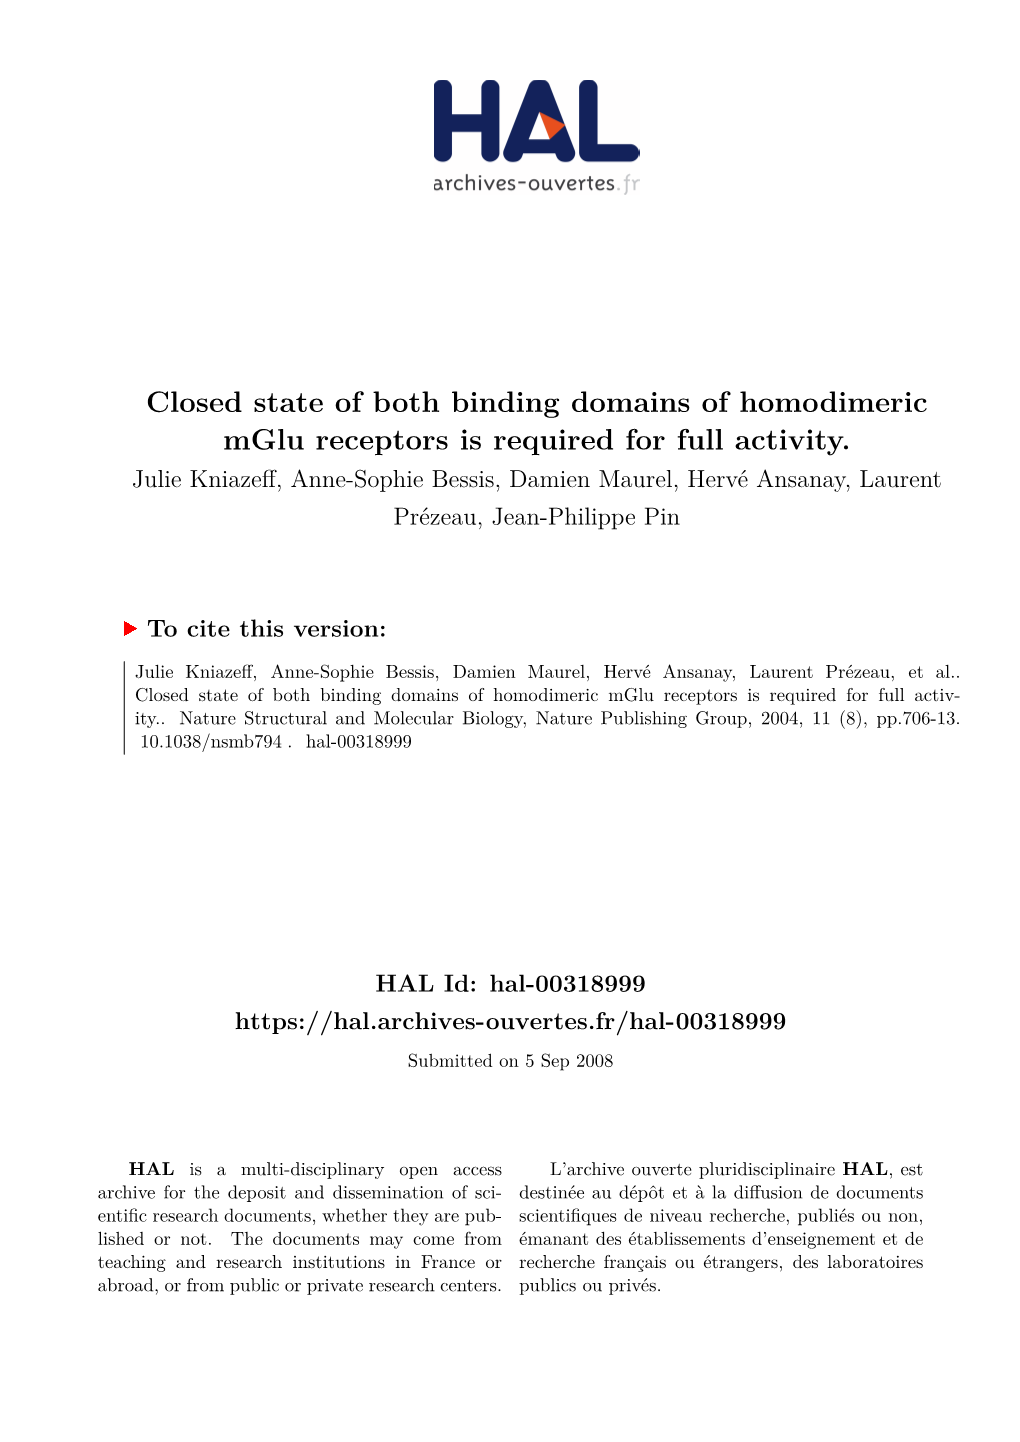 Closed State of Both Binding Domains of Homodimeric Mglu Receptors Is Required for Full Activity